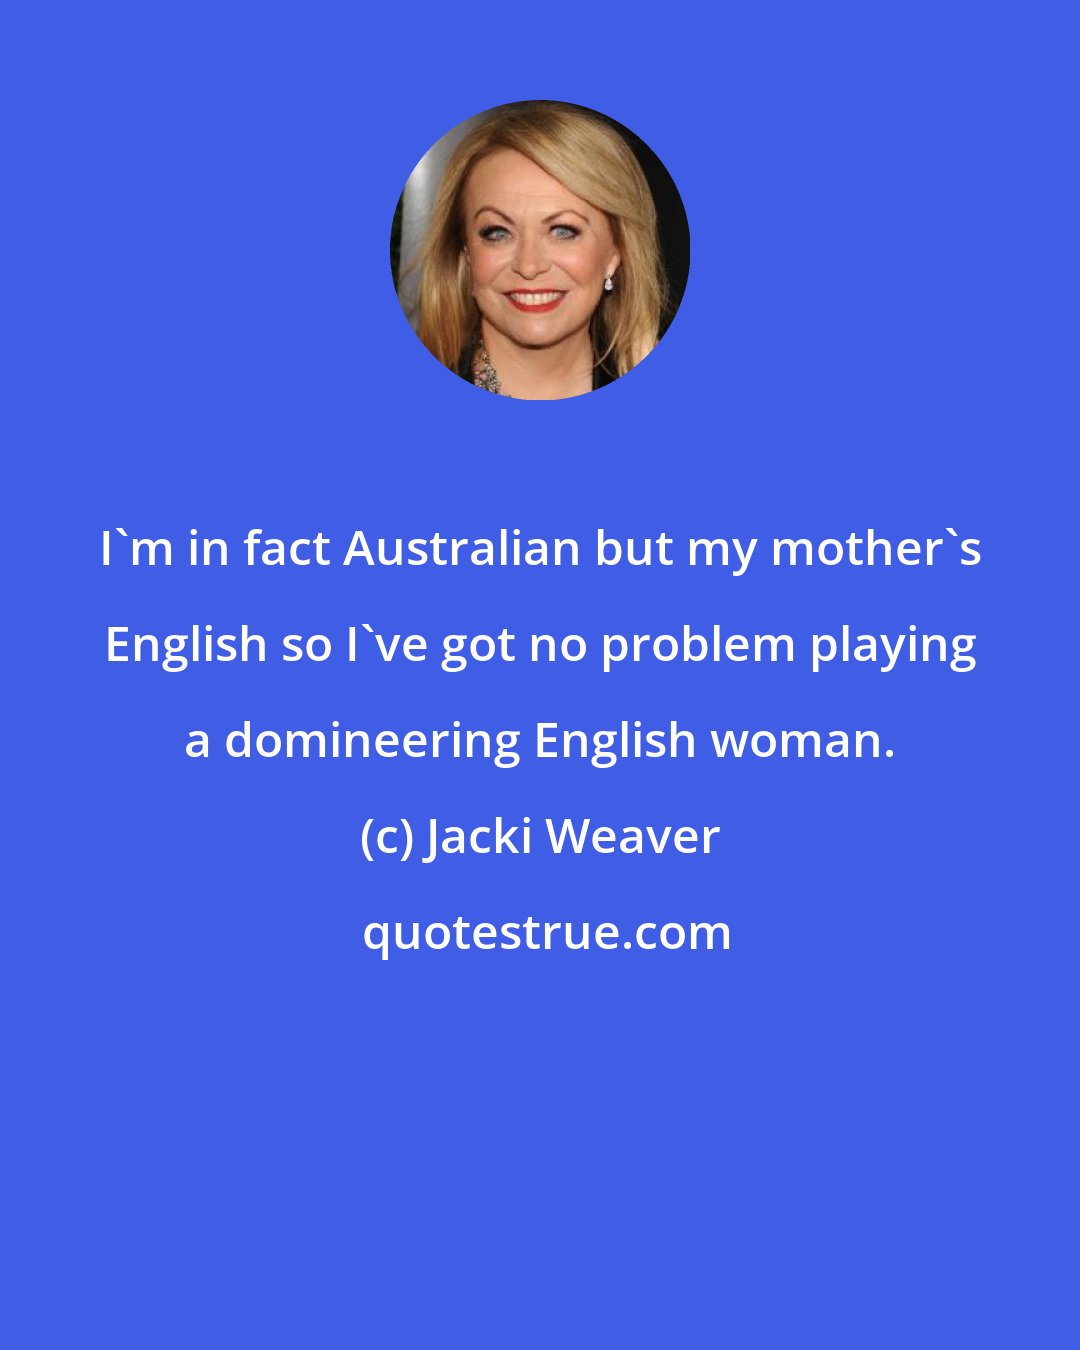 Jacki Weaver: I'm in fact Australian but my mother's English so I've got no problem playing a domineering English woman.